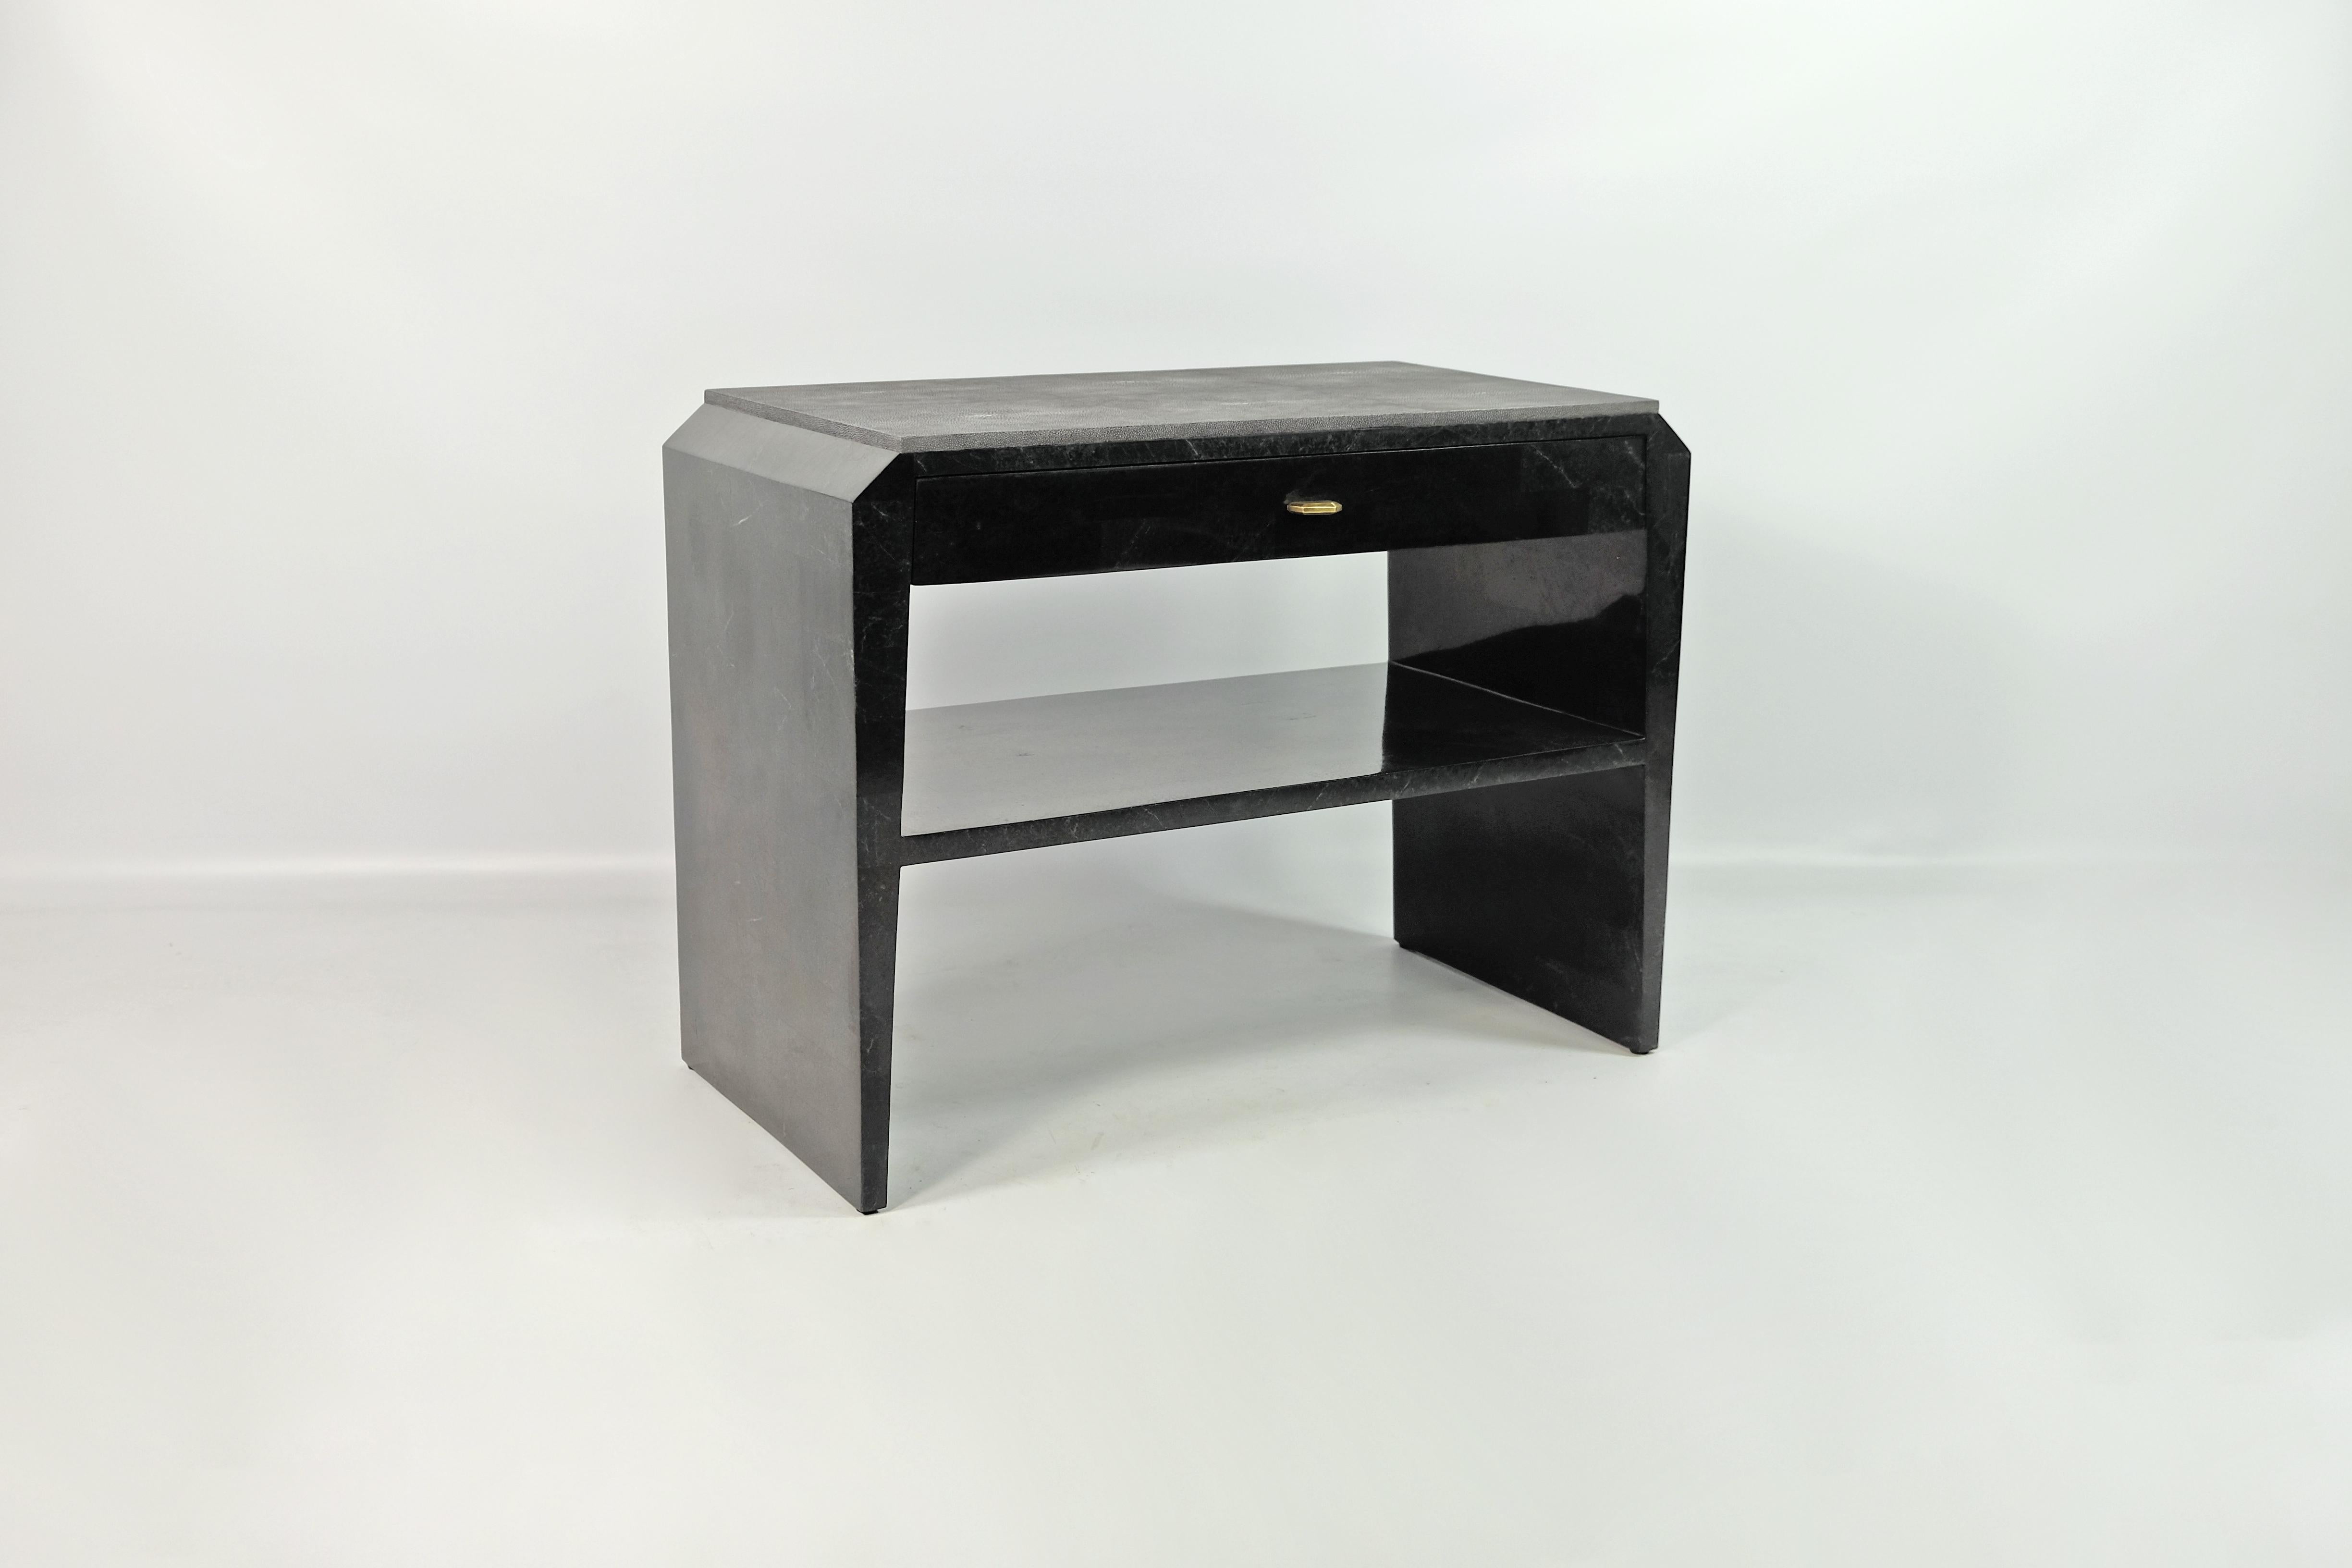 This pair of night stand tables is made of black stone (granit) marquetry with a top in shagreen.
 
There is one drawer with a dark wood veneer interior, and a shelf in black stone.
The knobs are in brass with an antic patina.

The dimensions